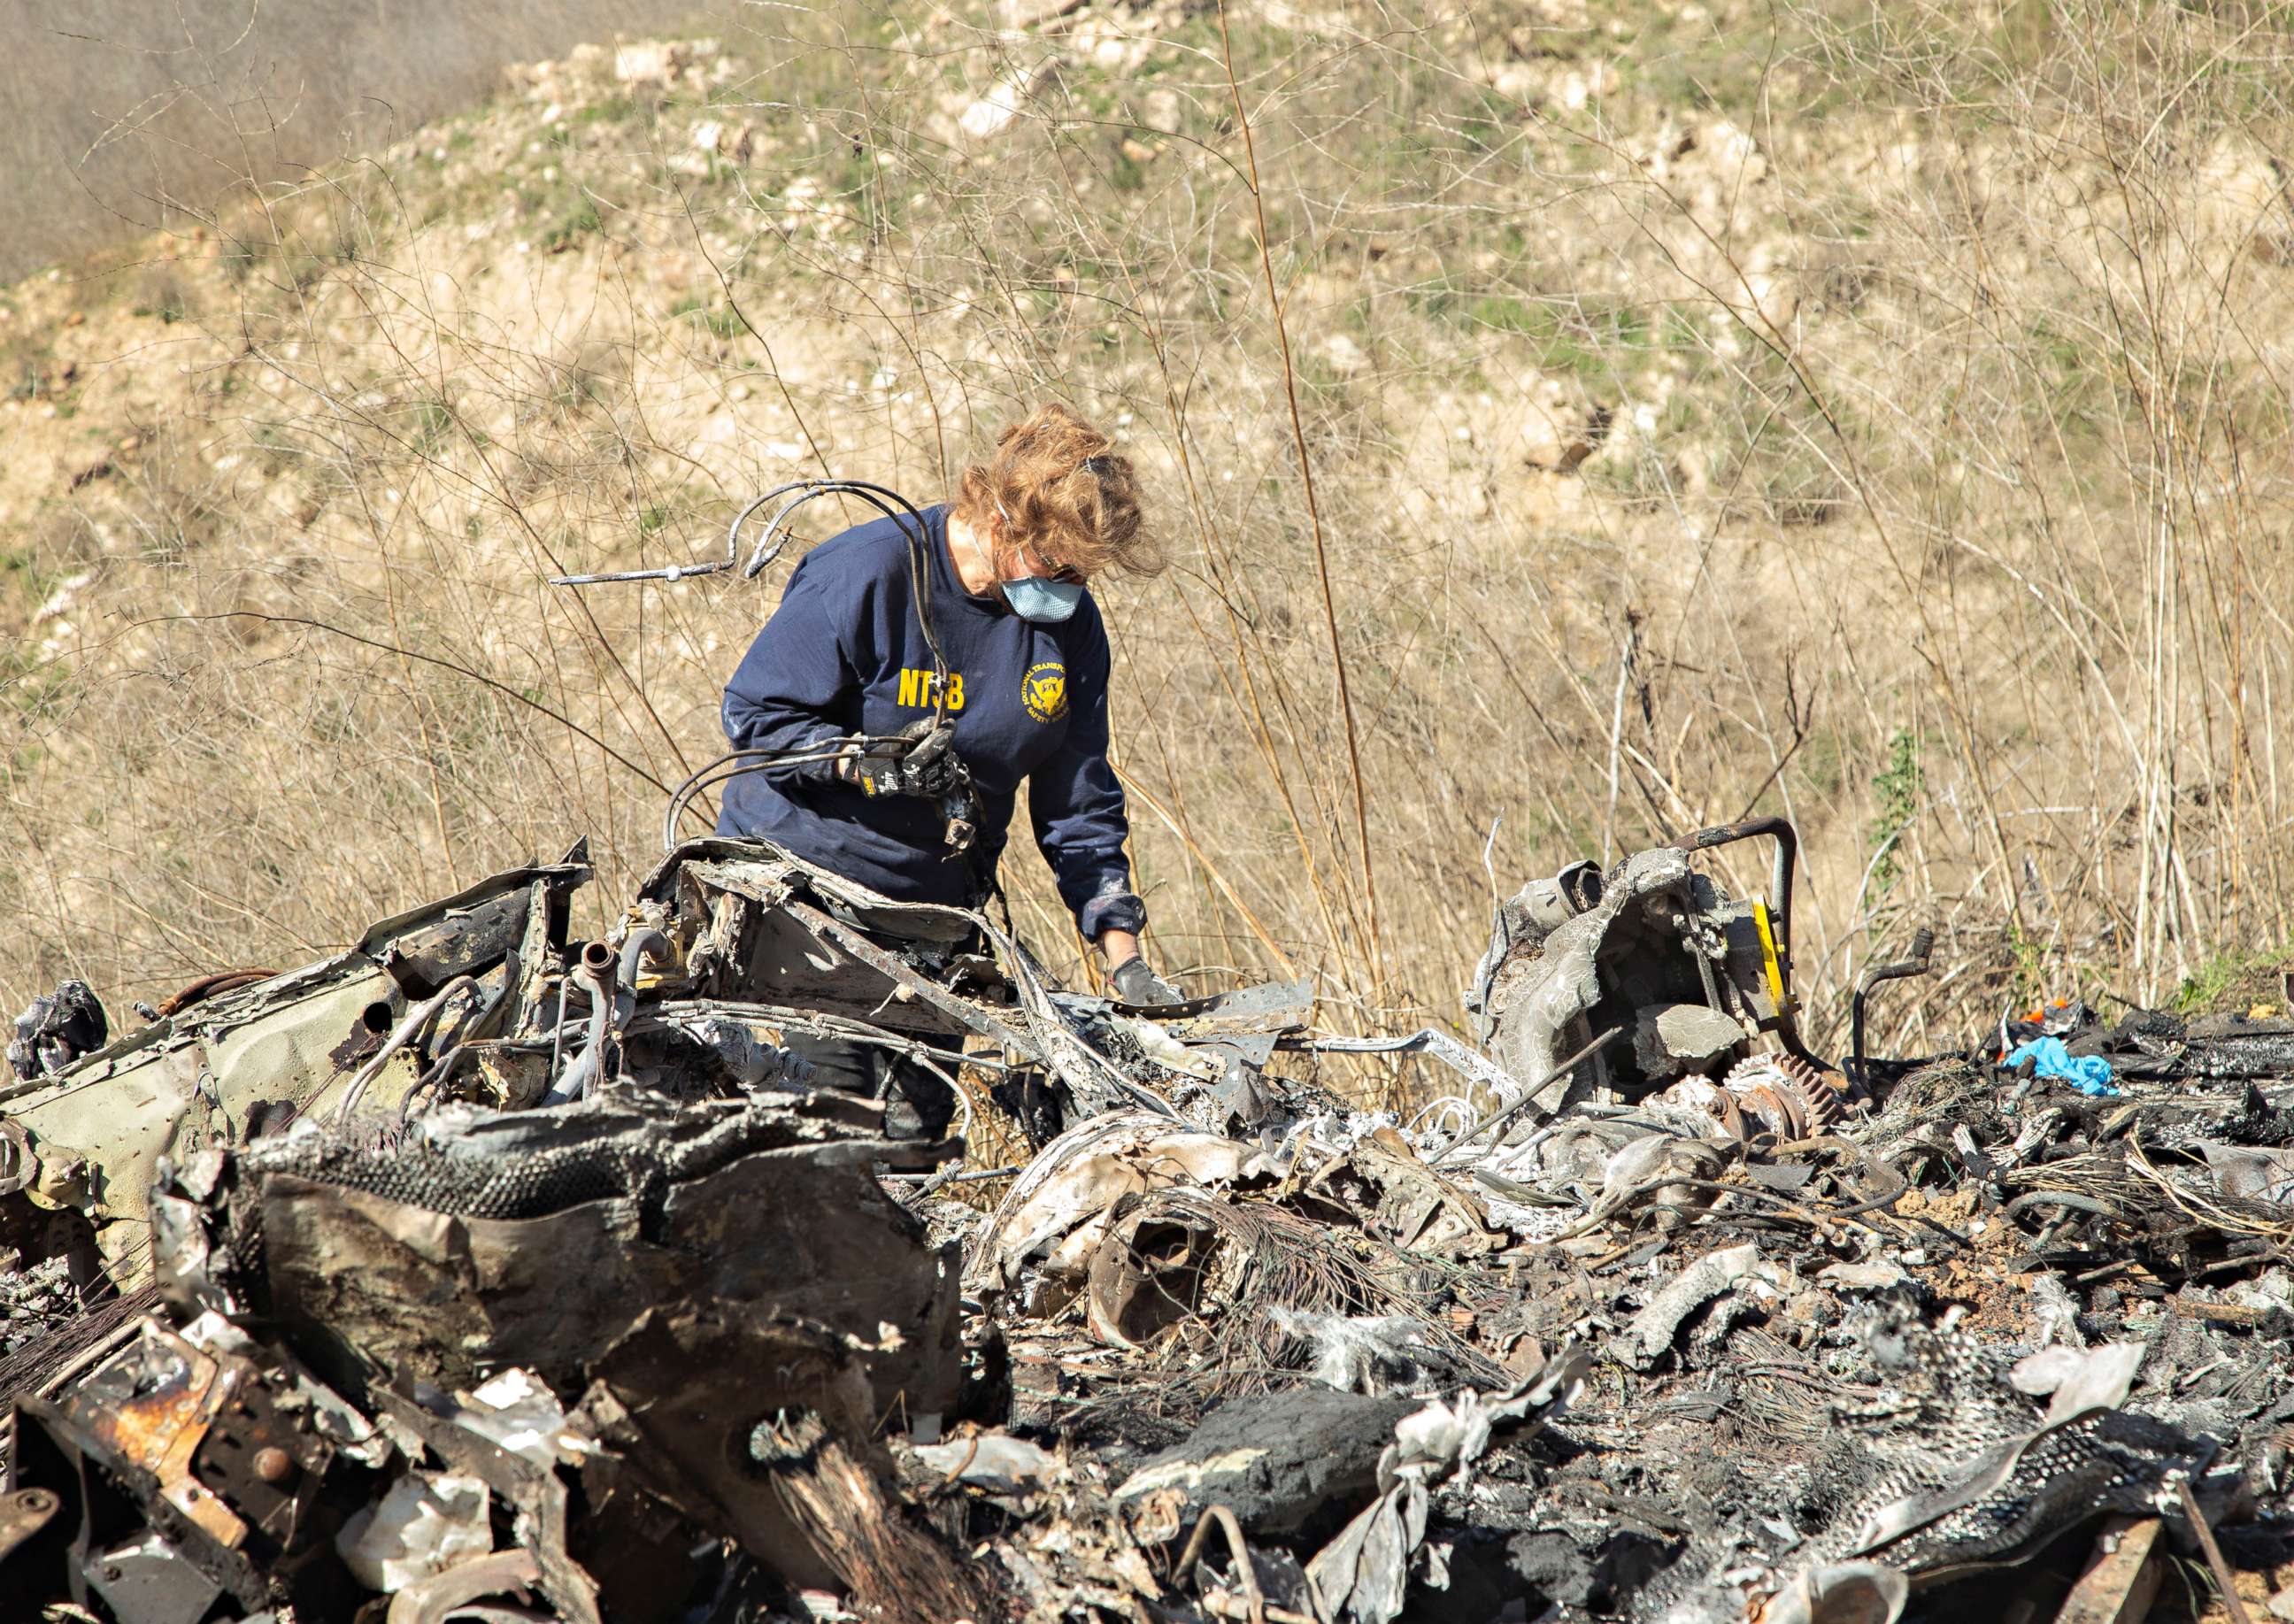 PHOTO: Photo taken Jan. 27, 2020, shows National Transportation Board (NTSB) investigator Carol Hogan examining the wreckage of the Jan. 26 helicopter crash near Calabasas, Calif., which killed nine people, including Kobe Bryant and his daughter Gianna.